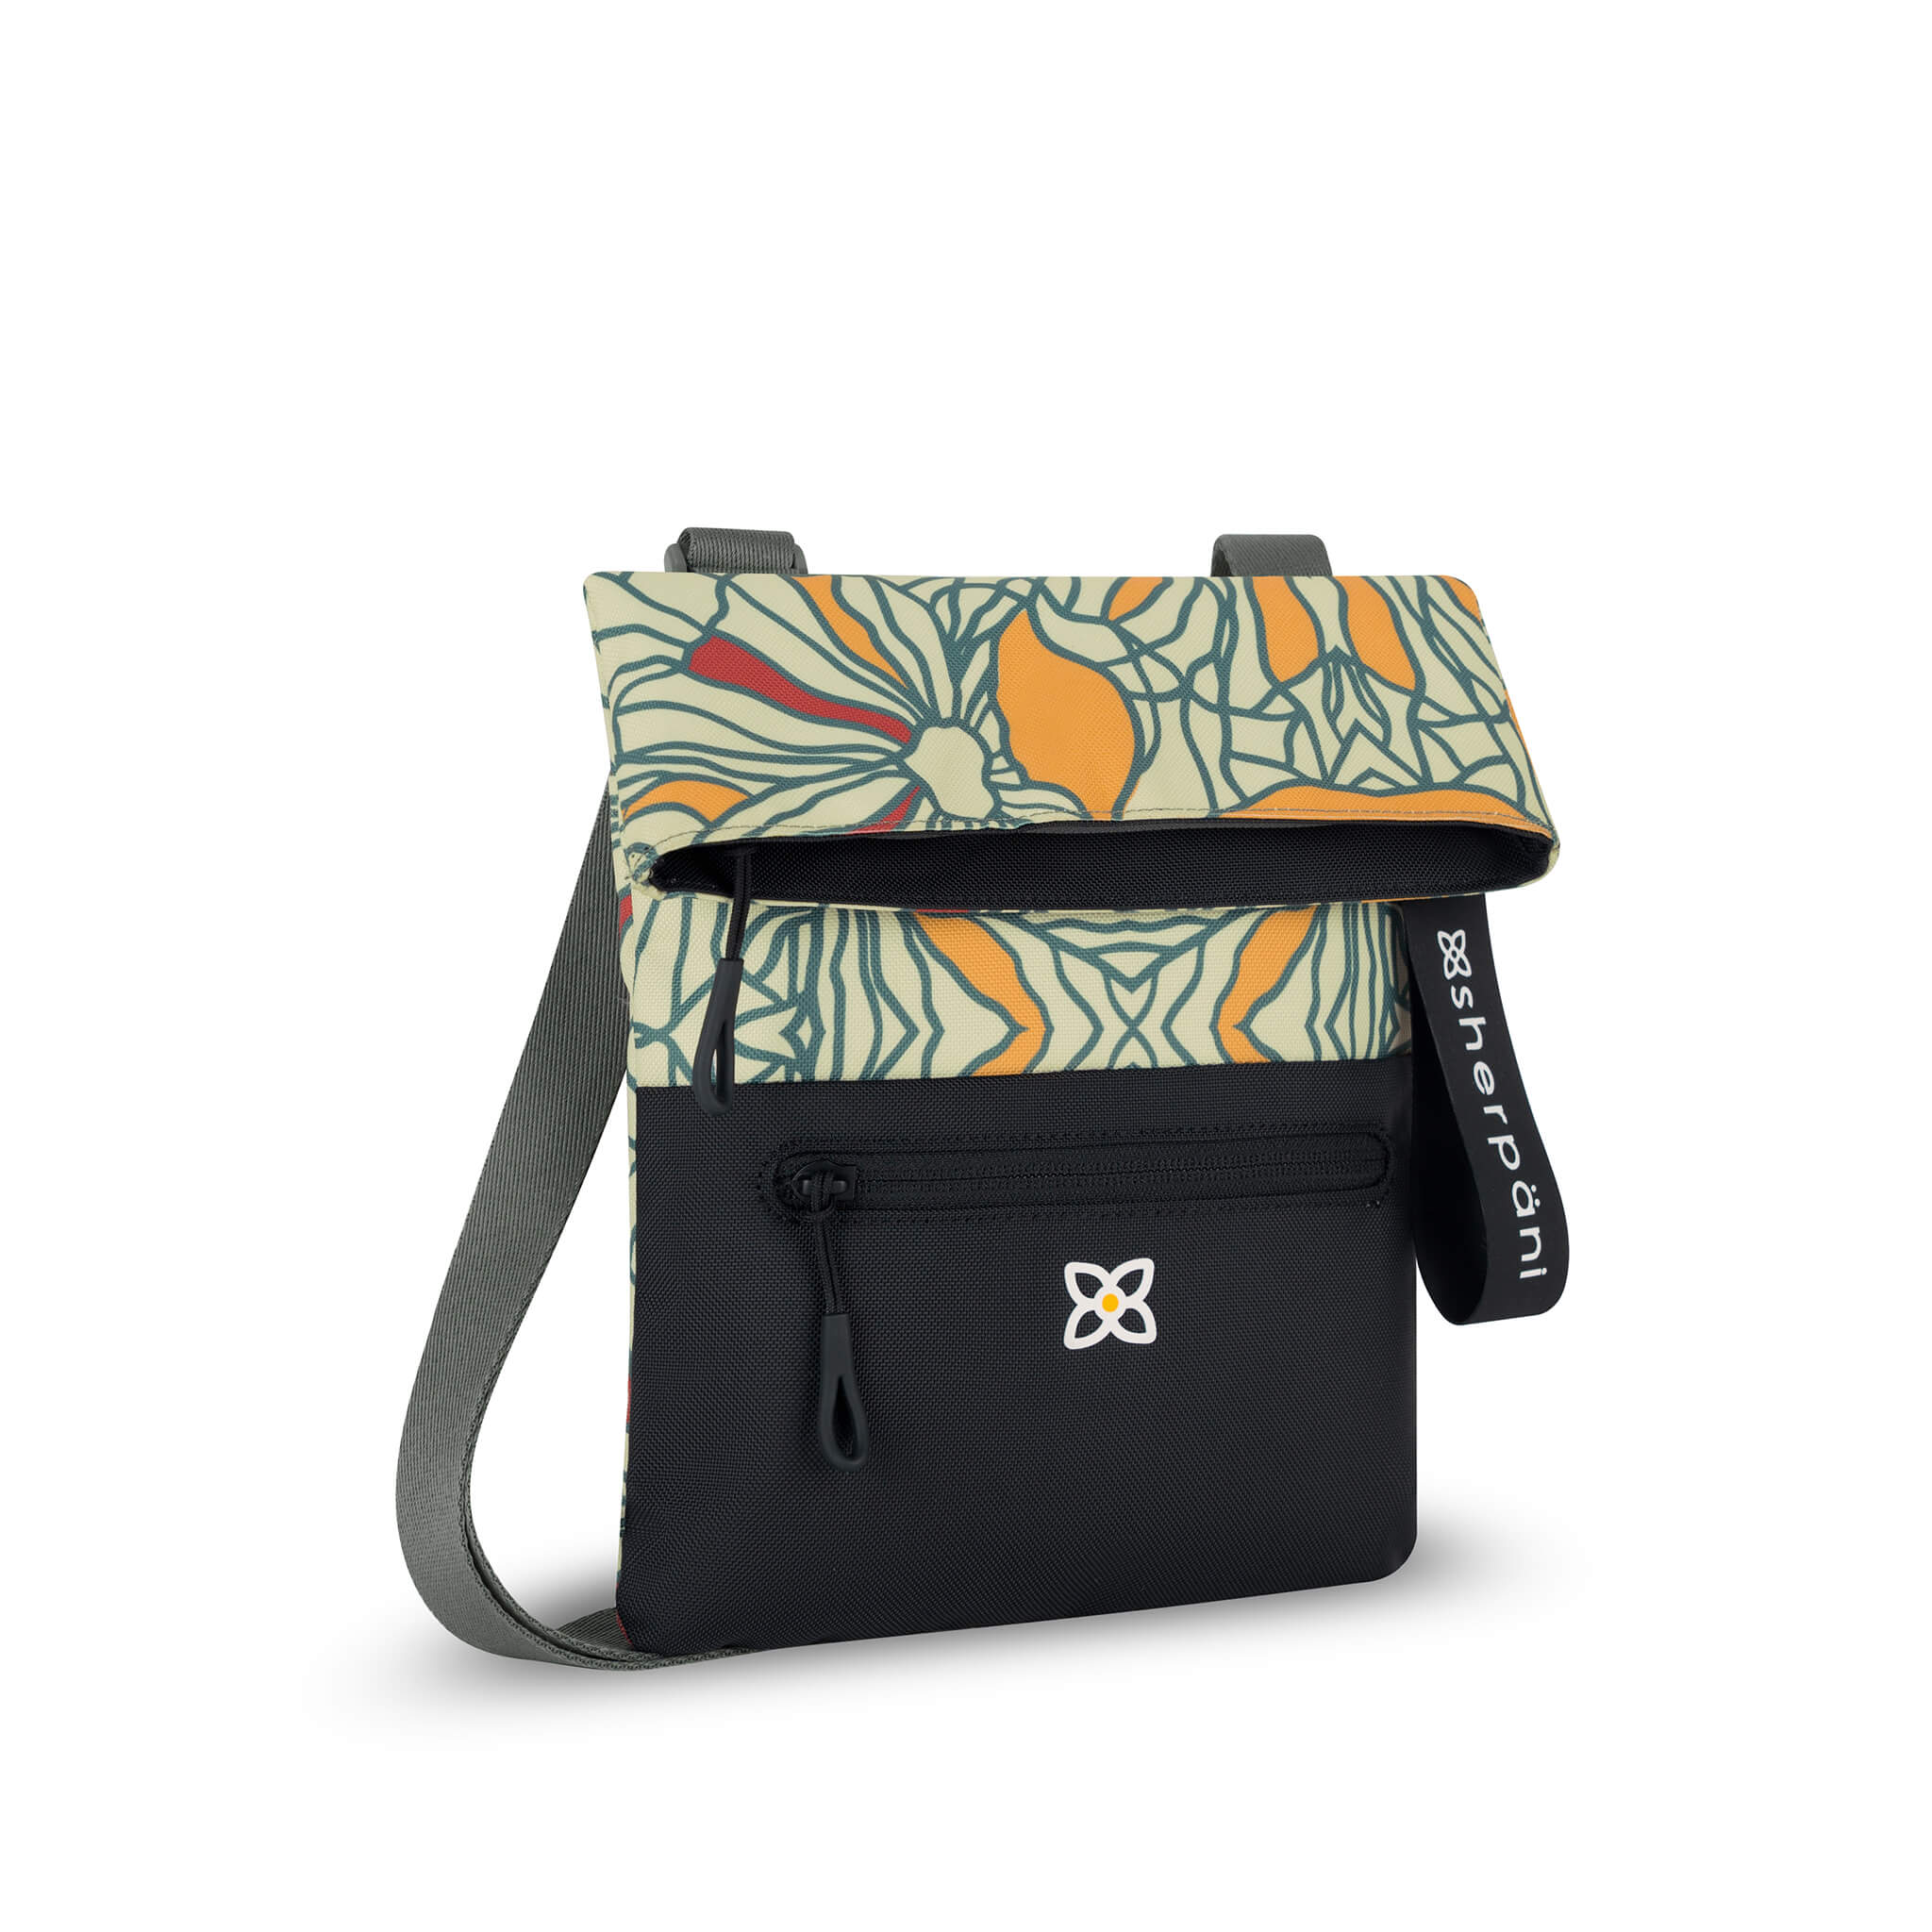 Angled front view of Sherpani fold over crossbody bag, the Pica in Fiori. Pica features include an adjustable crossbody strap, outside zipper pocket, back flap pocket, inside zipper pocket and slip pocket, detachable keychain and RFID protection. The Fiori colorway is two-toned in black and a floral pattern with red accents. 